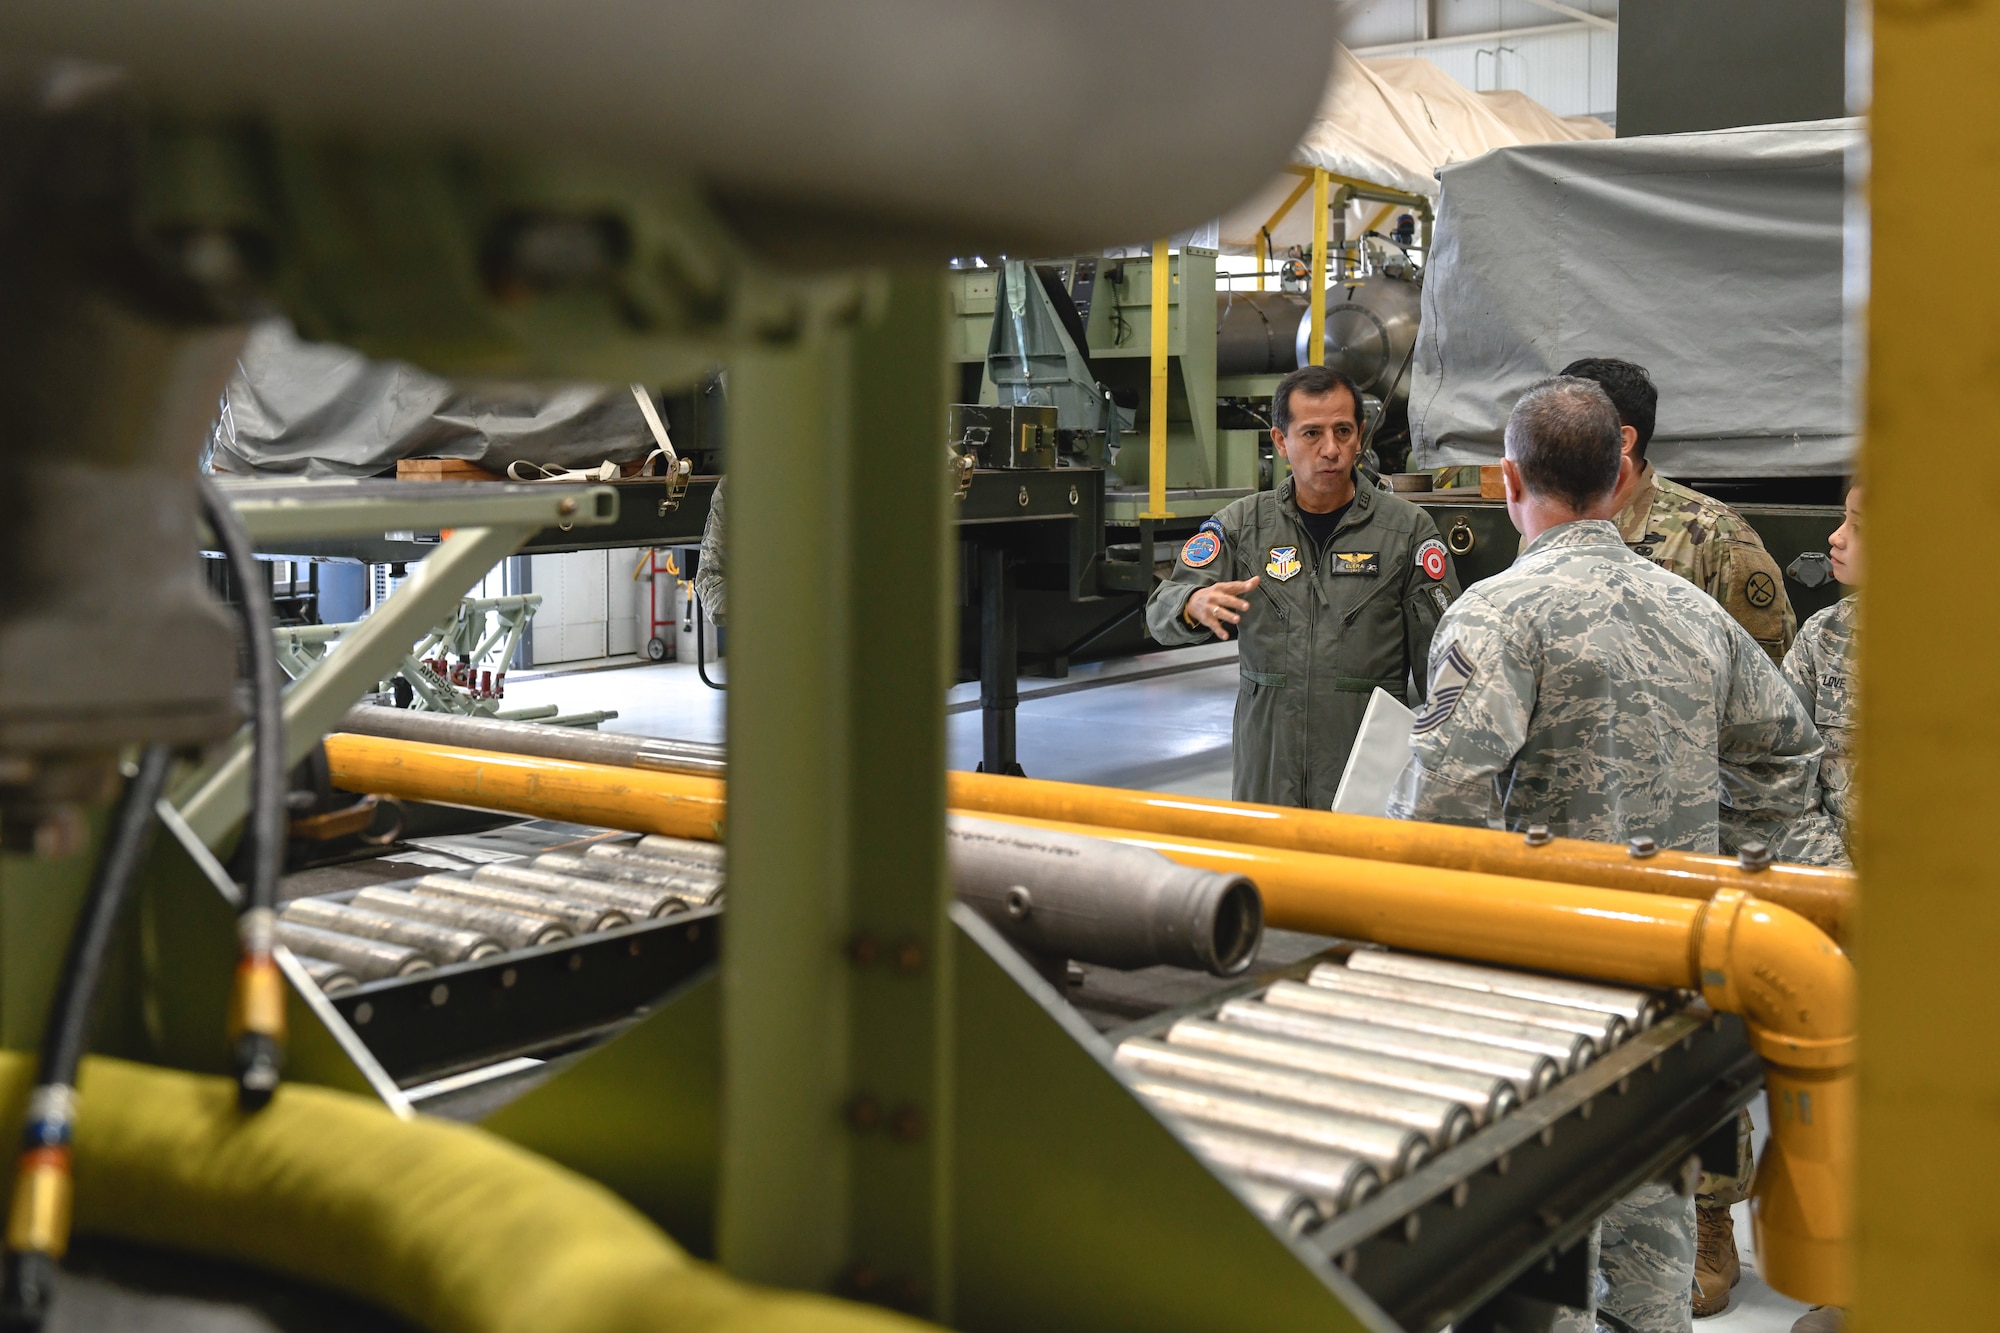 Peruvian Air Force Maj. Gen. Carlos G. Elera Camacho, the Assistant Defense and Air Attaché to the Embassy of Peru in the United States of America, asks U.S. Air Force Reserve Senior Master Sgt. Phillip Aliberti, aerial spray maintenance superintendent, a question about the Modular Aerial Spray System (MASS), June 17, 2019, here.